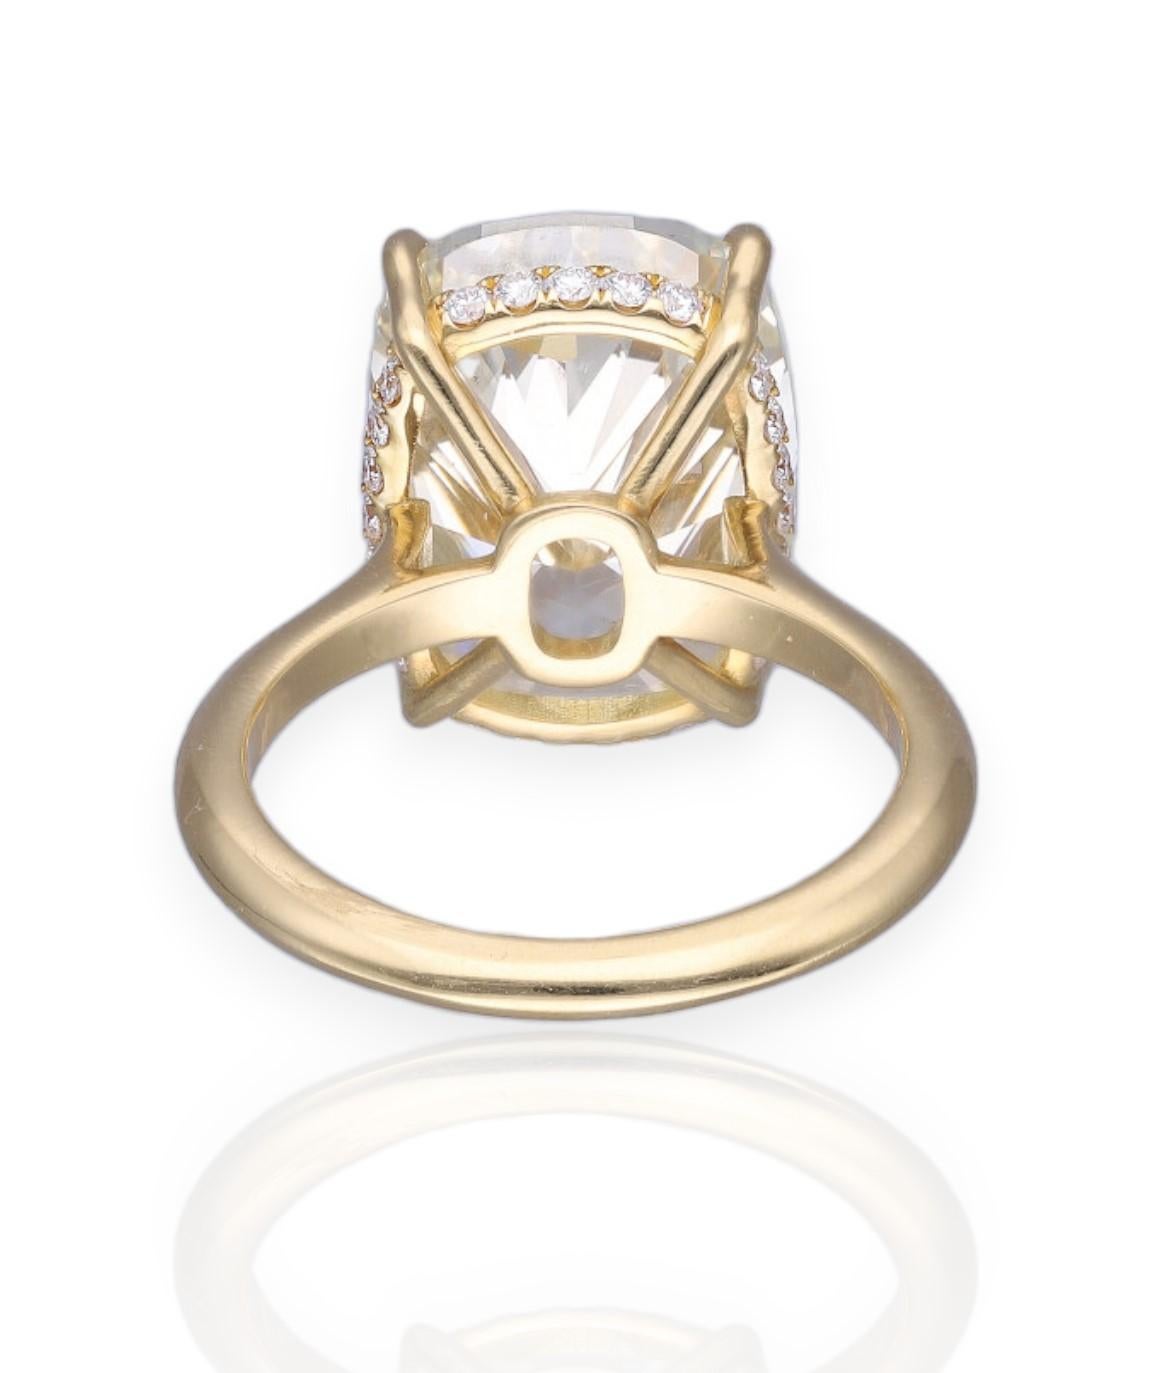 10ct cushion cut diamond ring with hidden halo in 18ct yellow gold.
Cushion cut certfied by HRD Antwerp at L colour VS2 clarity
HRD certificate number 210000000611 10.10cts 

Halo has 0.21cts of diamonds

The ring can be customised to your own